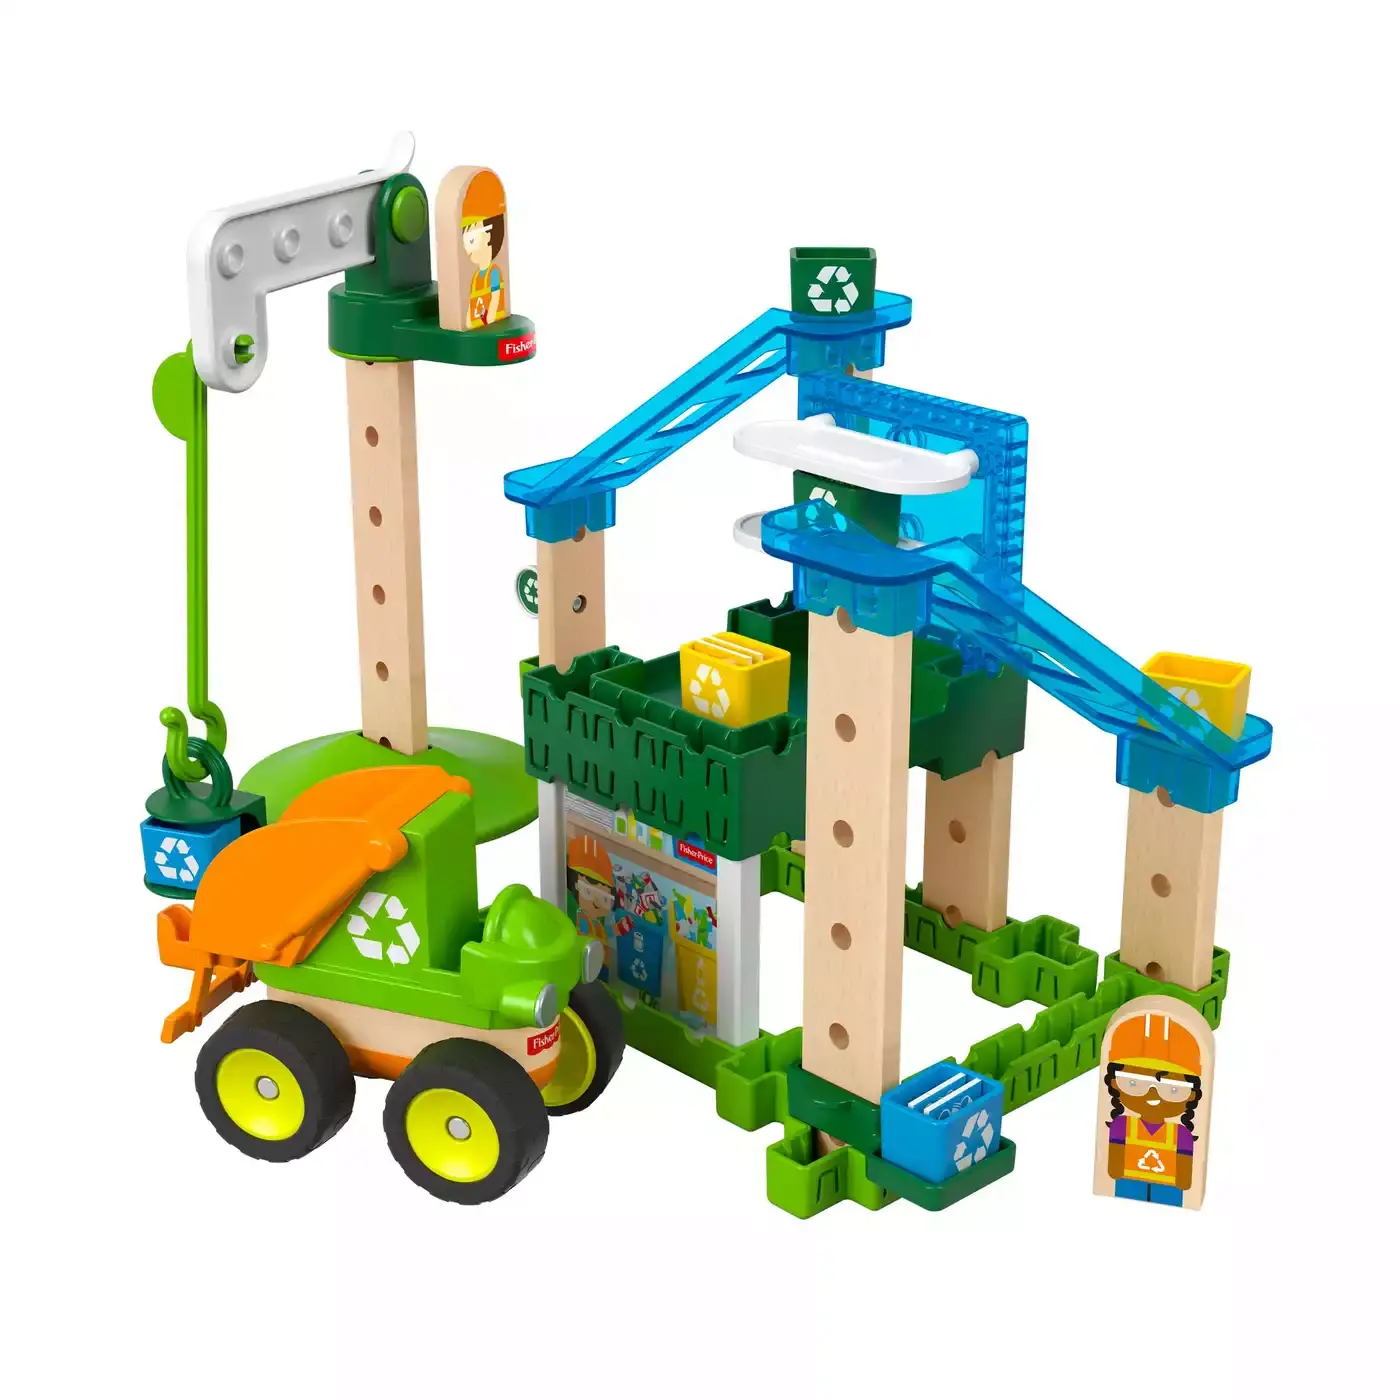 Wunder Werker Recycling Center Fisher Price 2000577475728 1